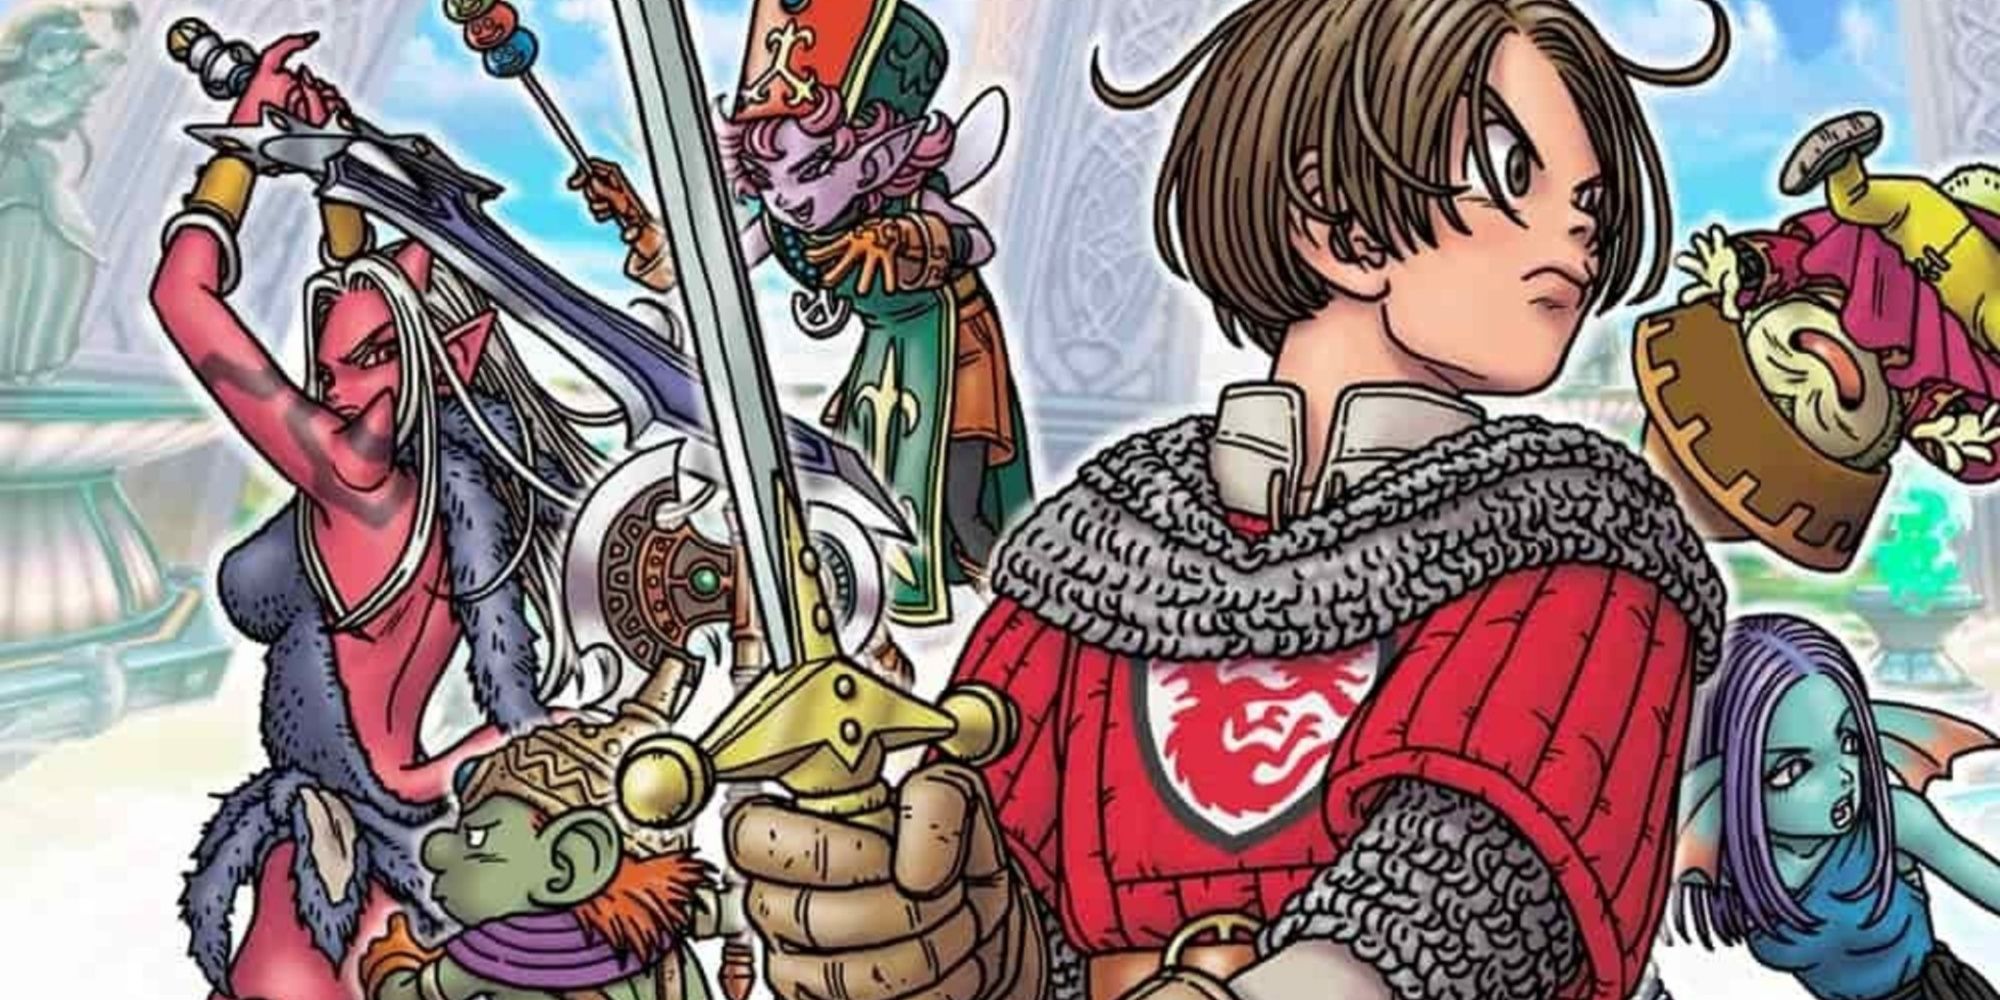 Promo art featuring characters in Dragon Quest 10